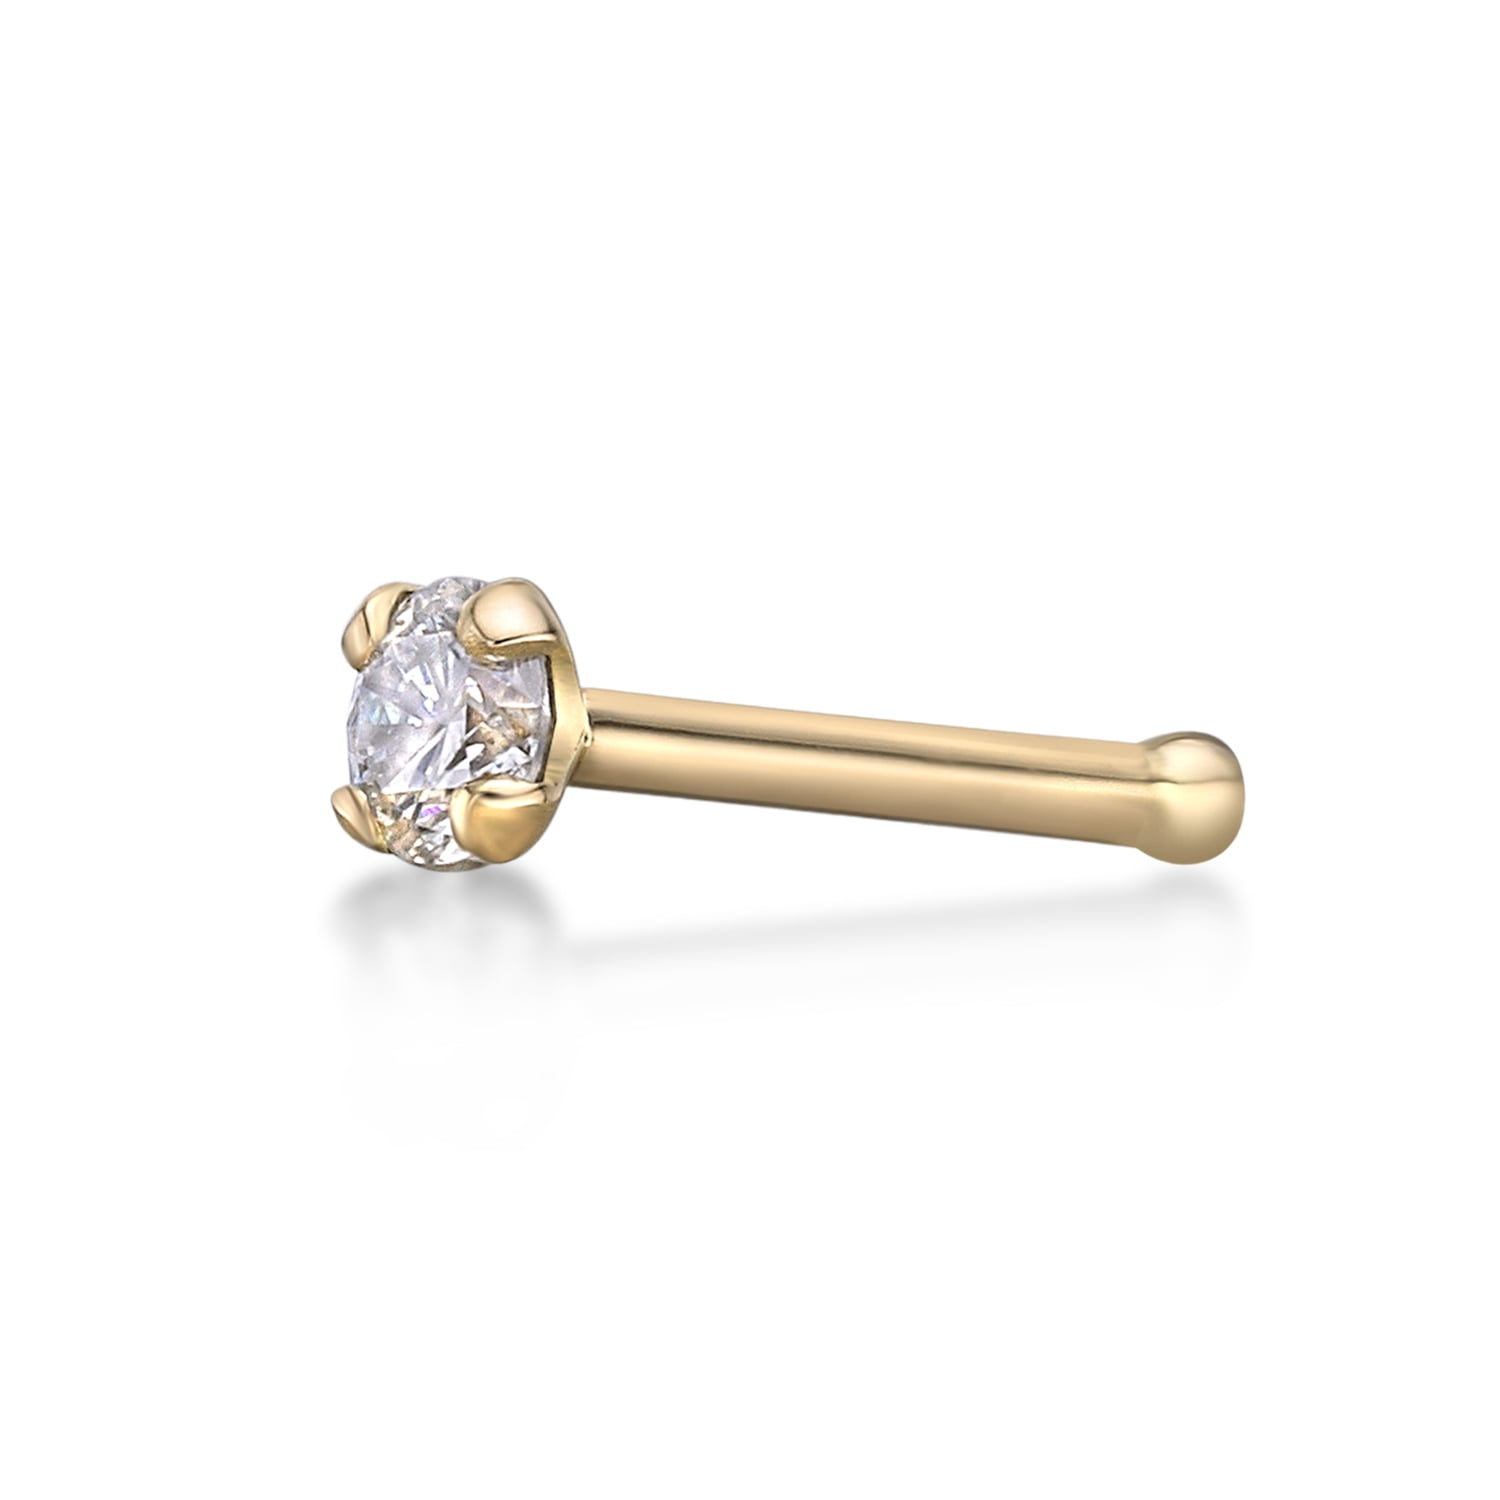 Details about   Genuine 14k Yellow Gold 0.03 Diamond Nose Screw Stud Pin 24 g 2.50 mm 